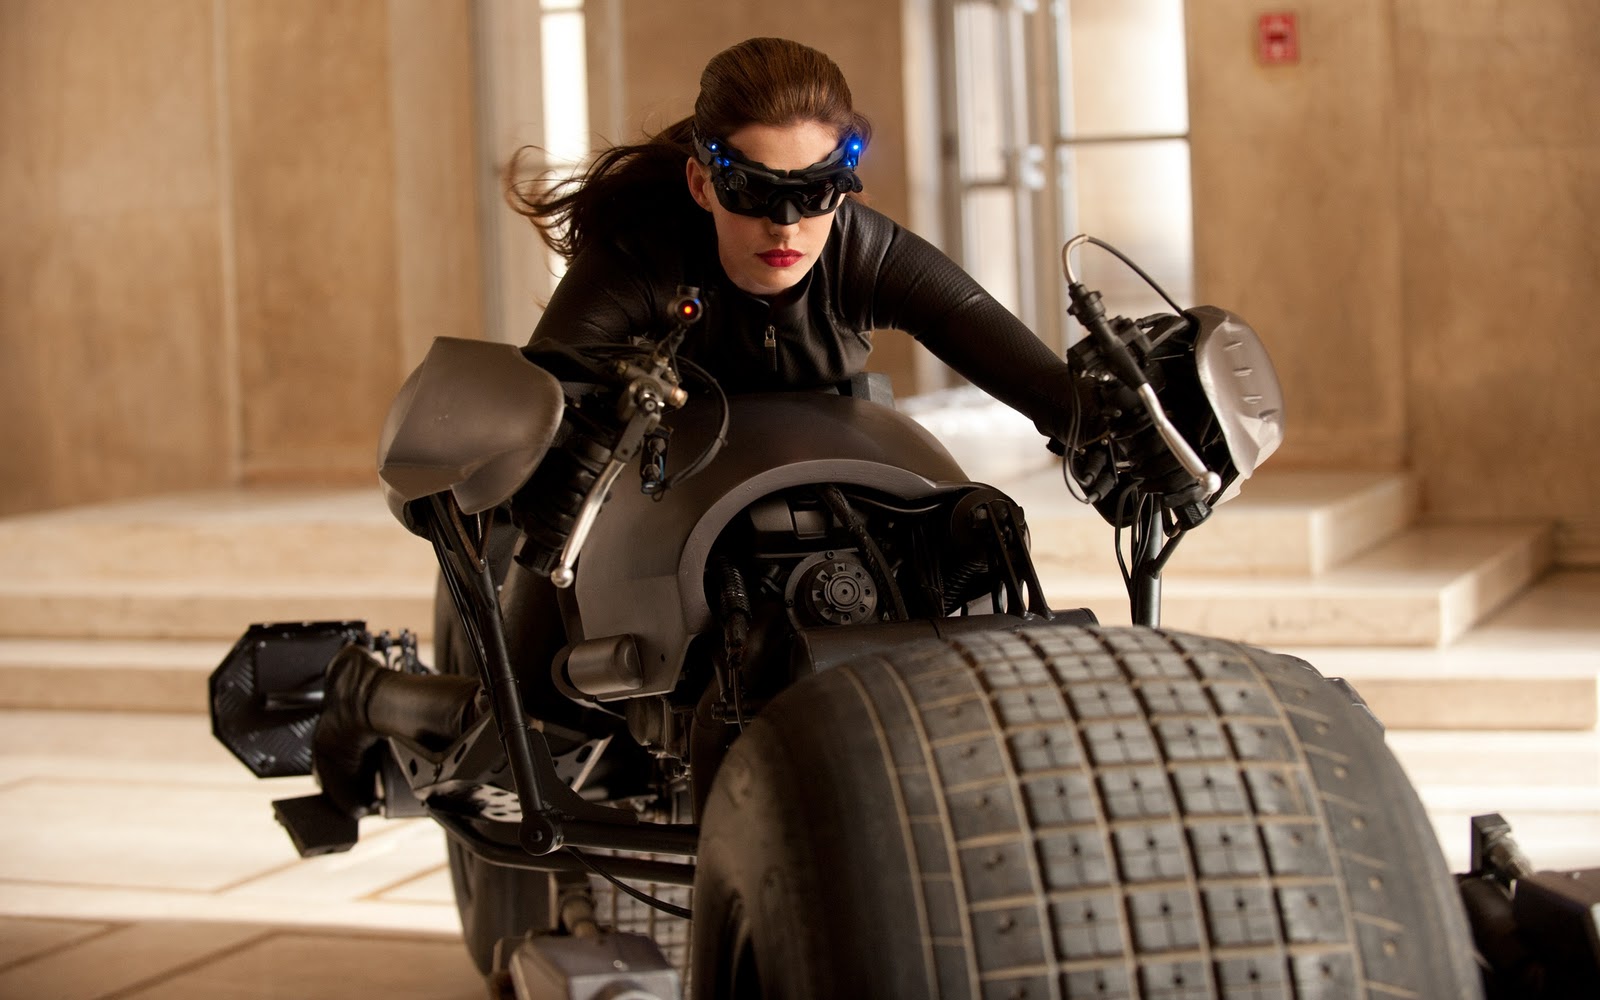 anne_hathaway_as_catwoman-2560x1600